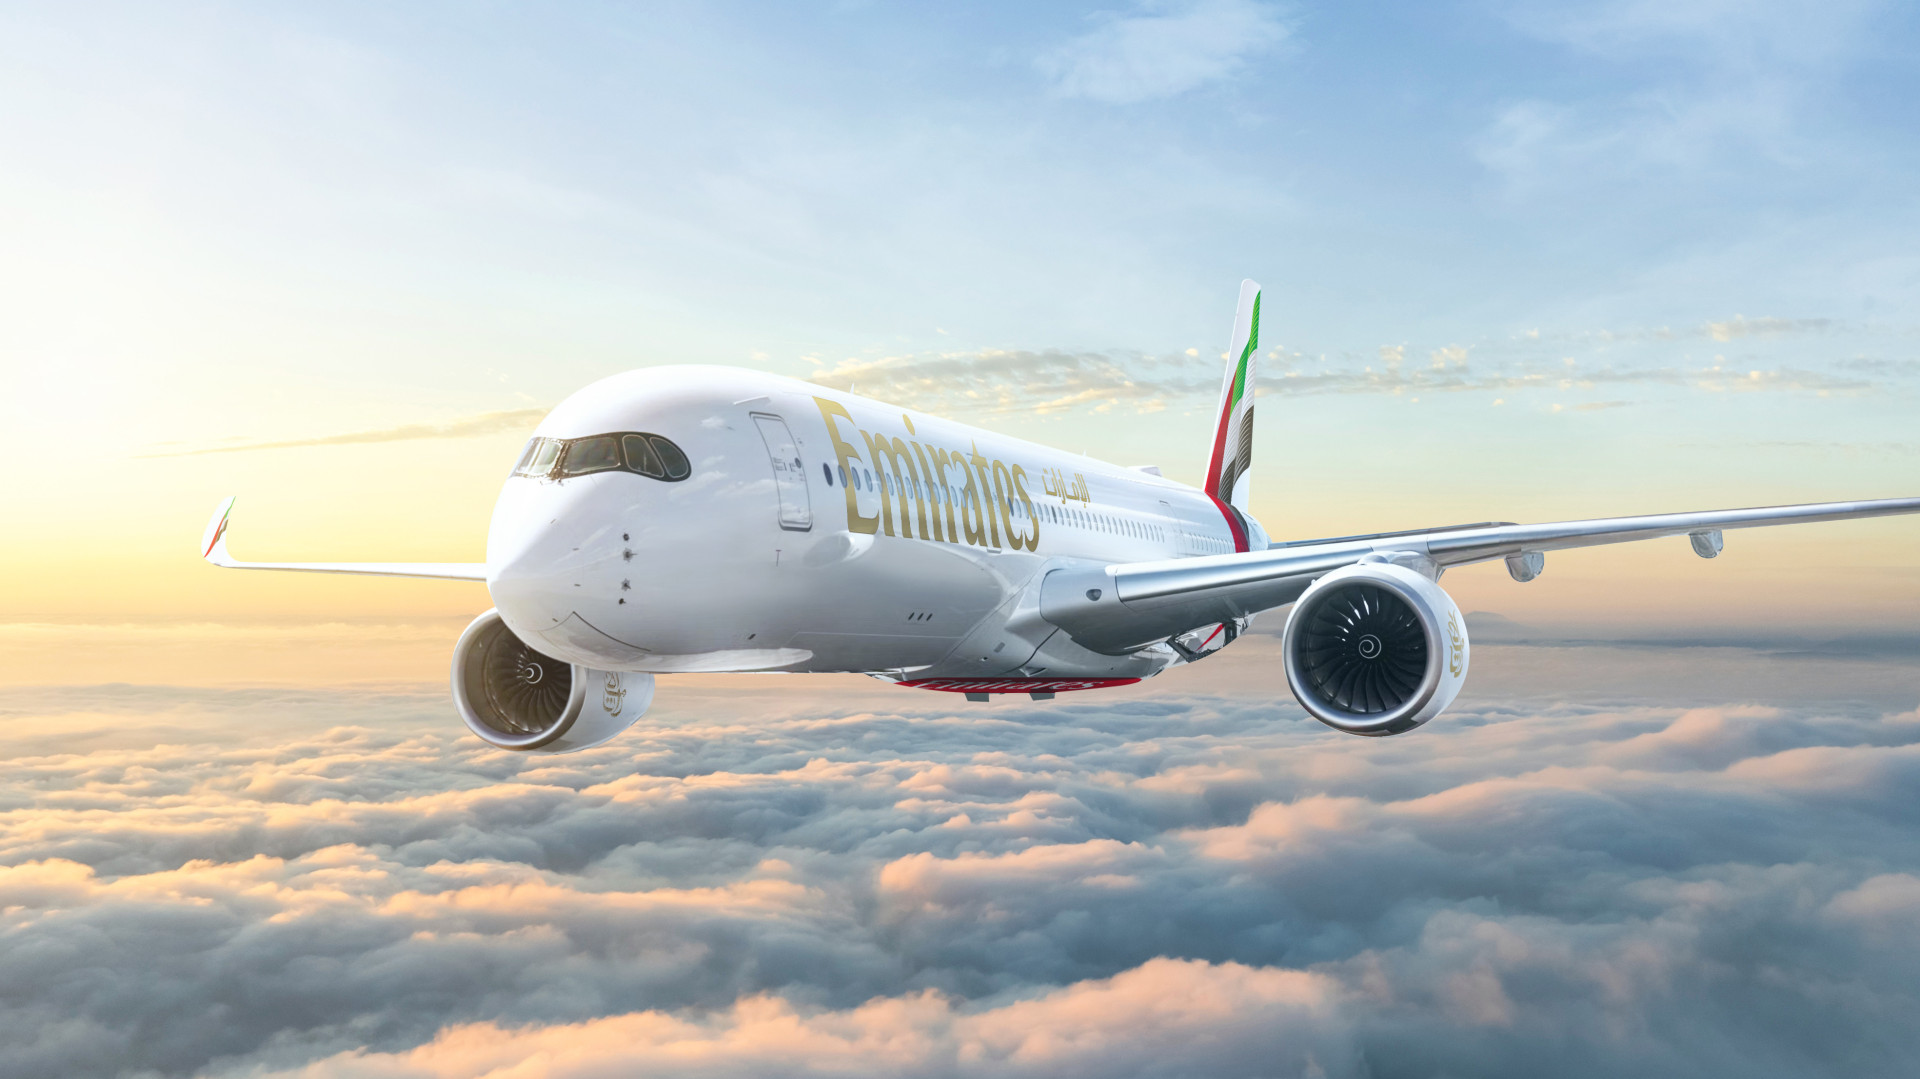 Emirates Announces First Destinations for its Brand-New Airbus A350